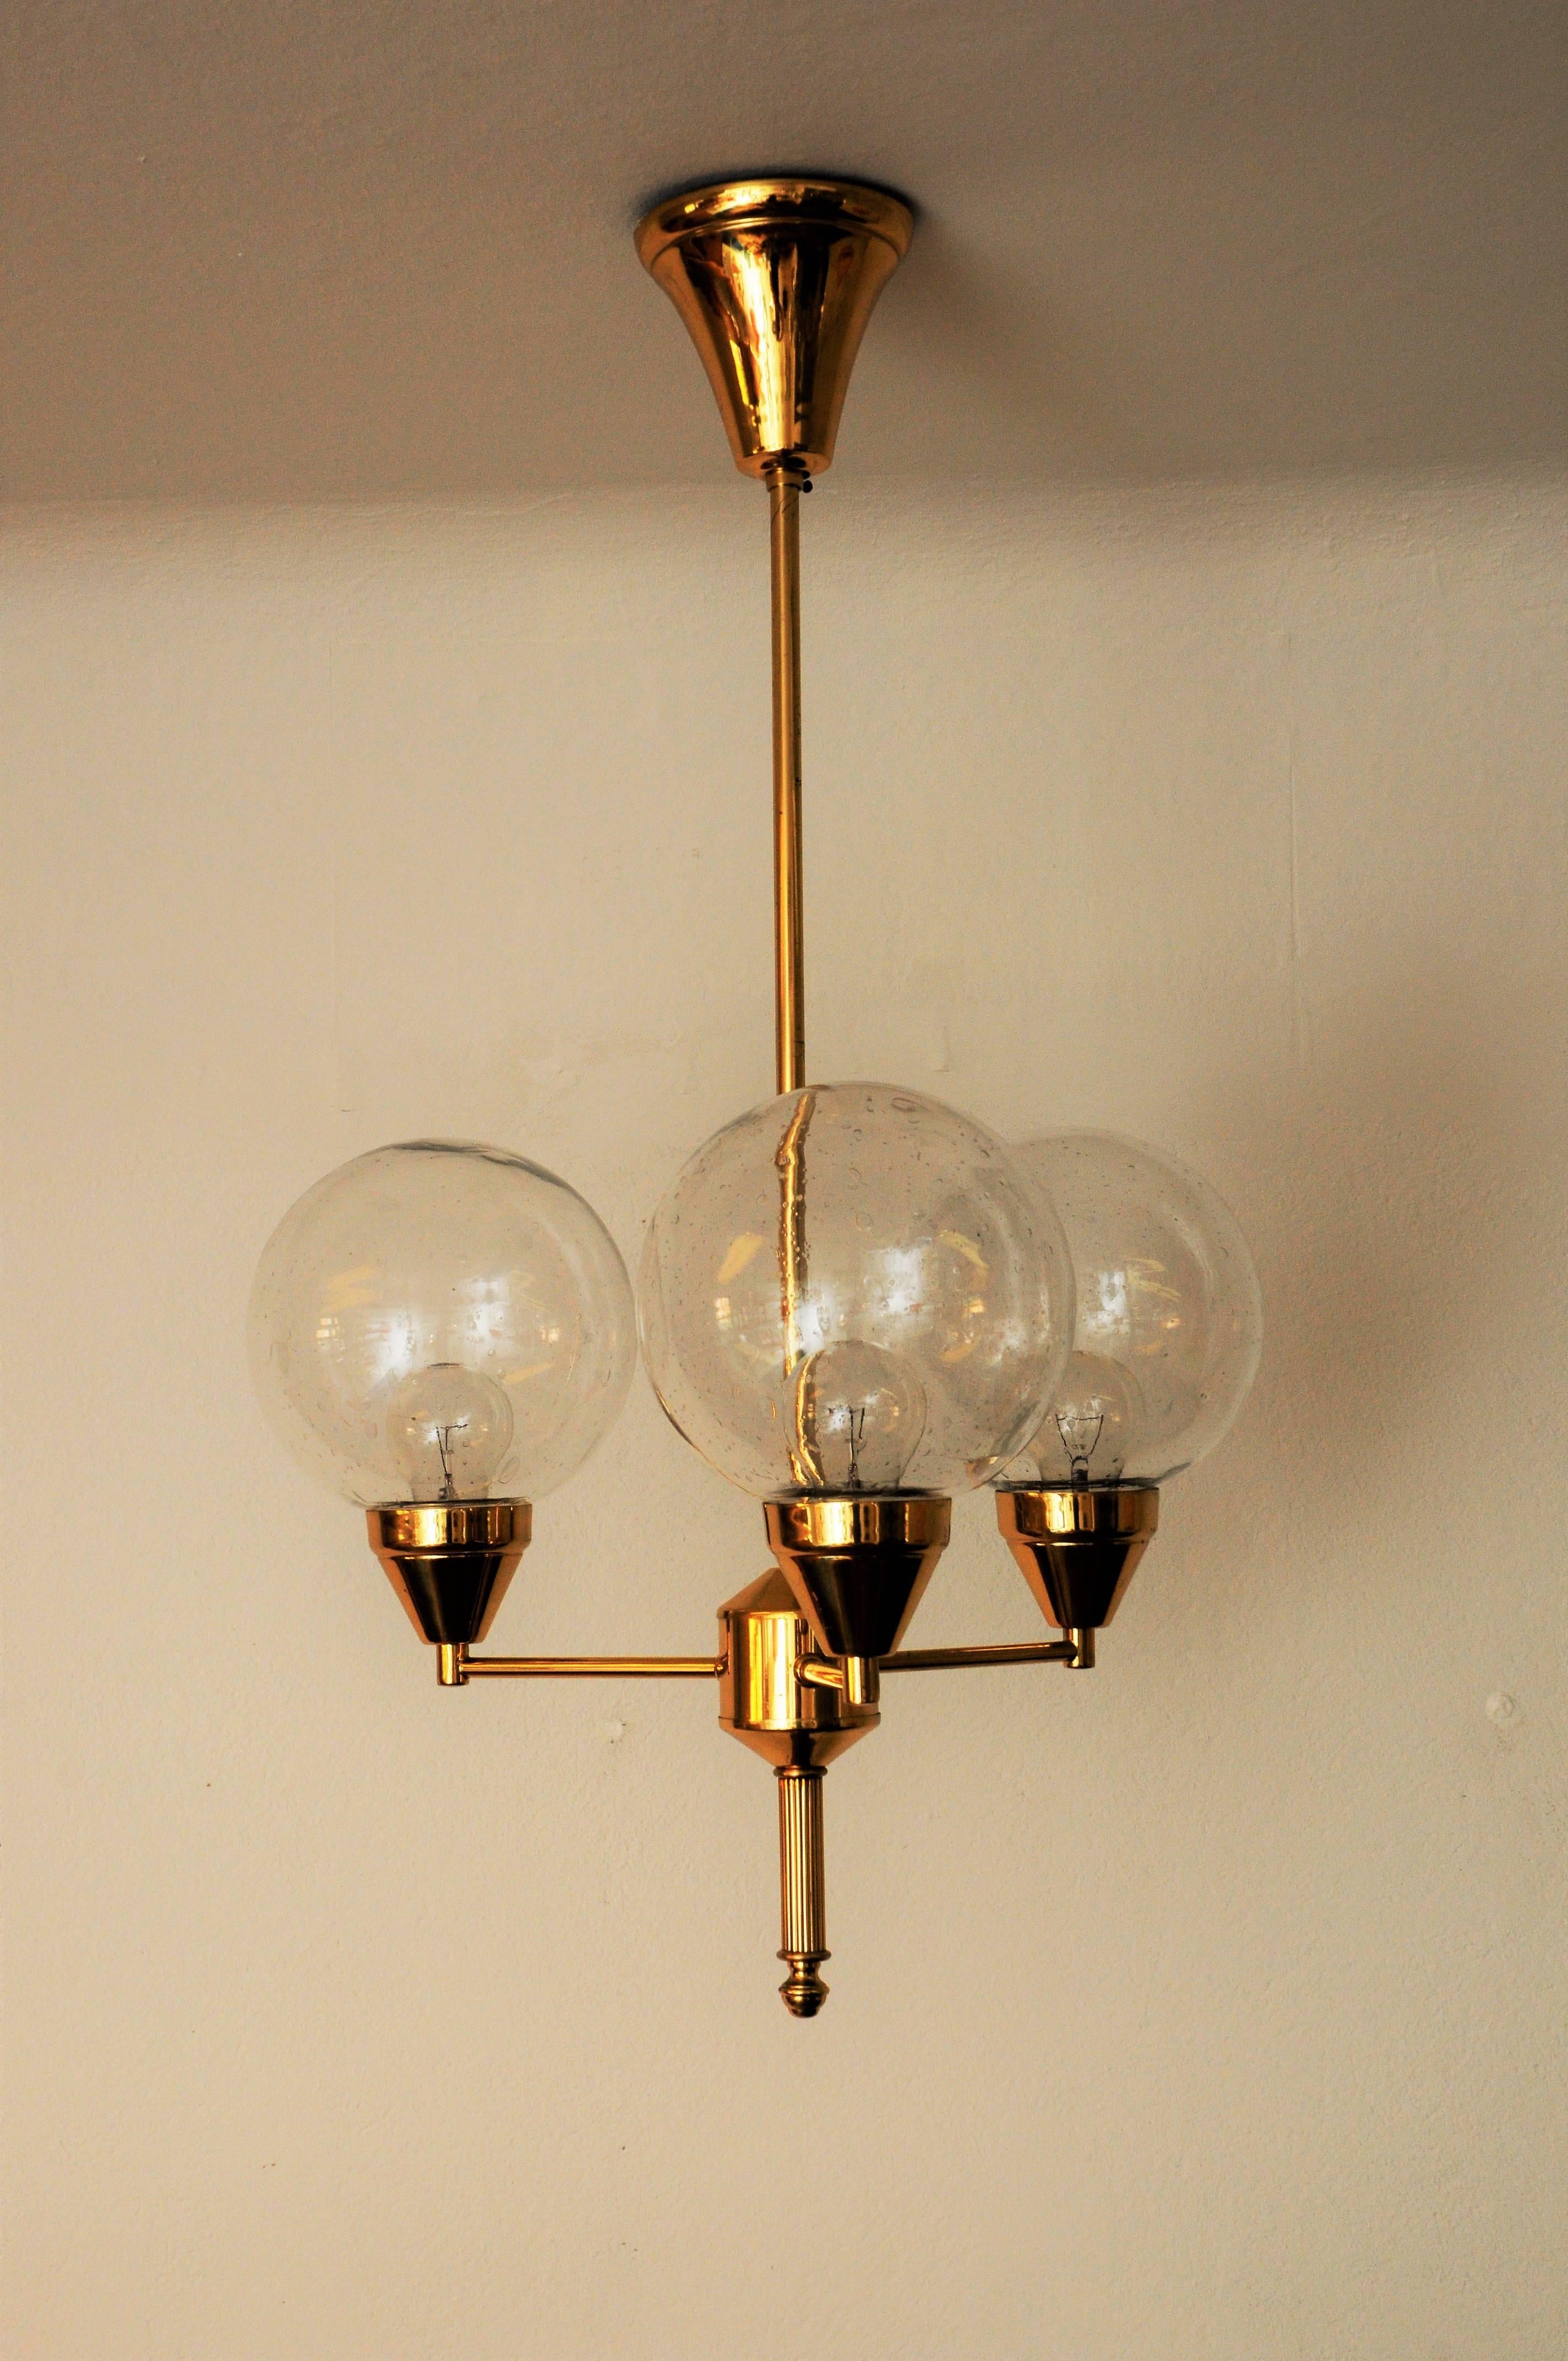 Swedish Midcentury Brass Ceiling Lamp with Three Clear Glass Domes 1960s, Sweden